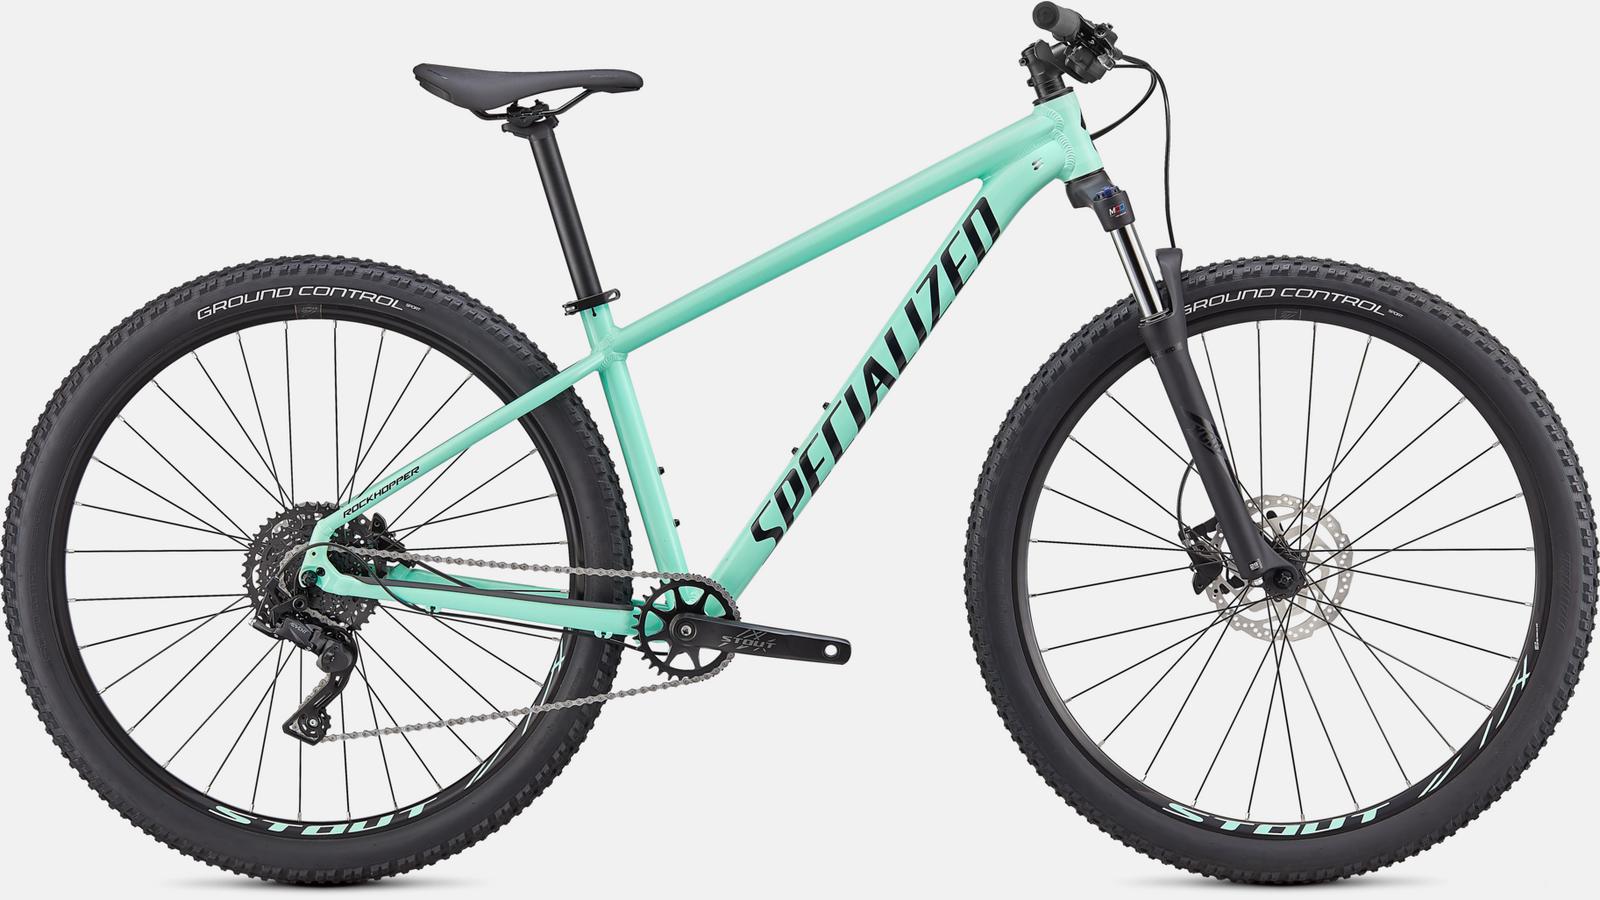 Paint for 2021 Specialized Rockhopper Comp - Gloss Oasis